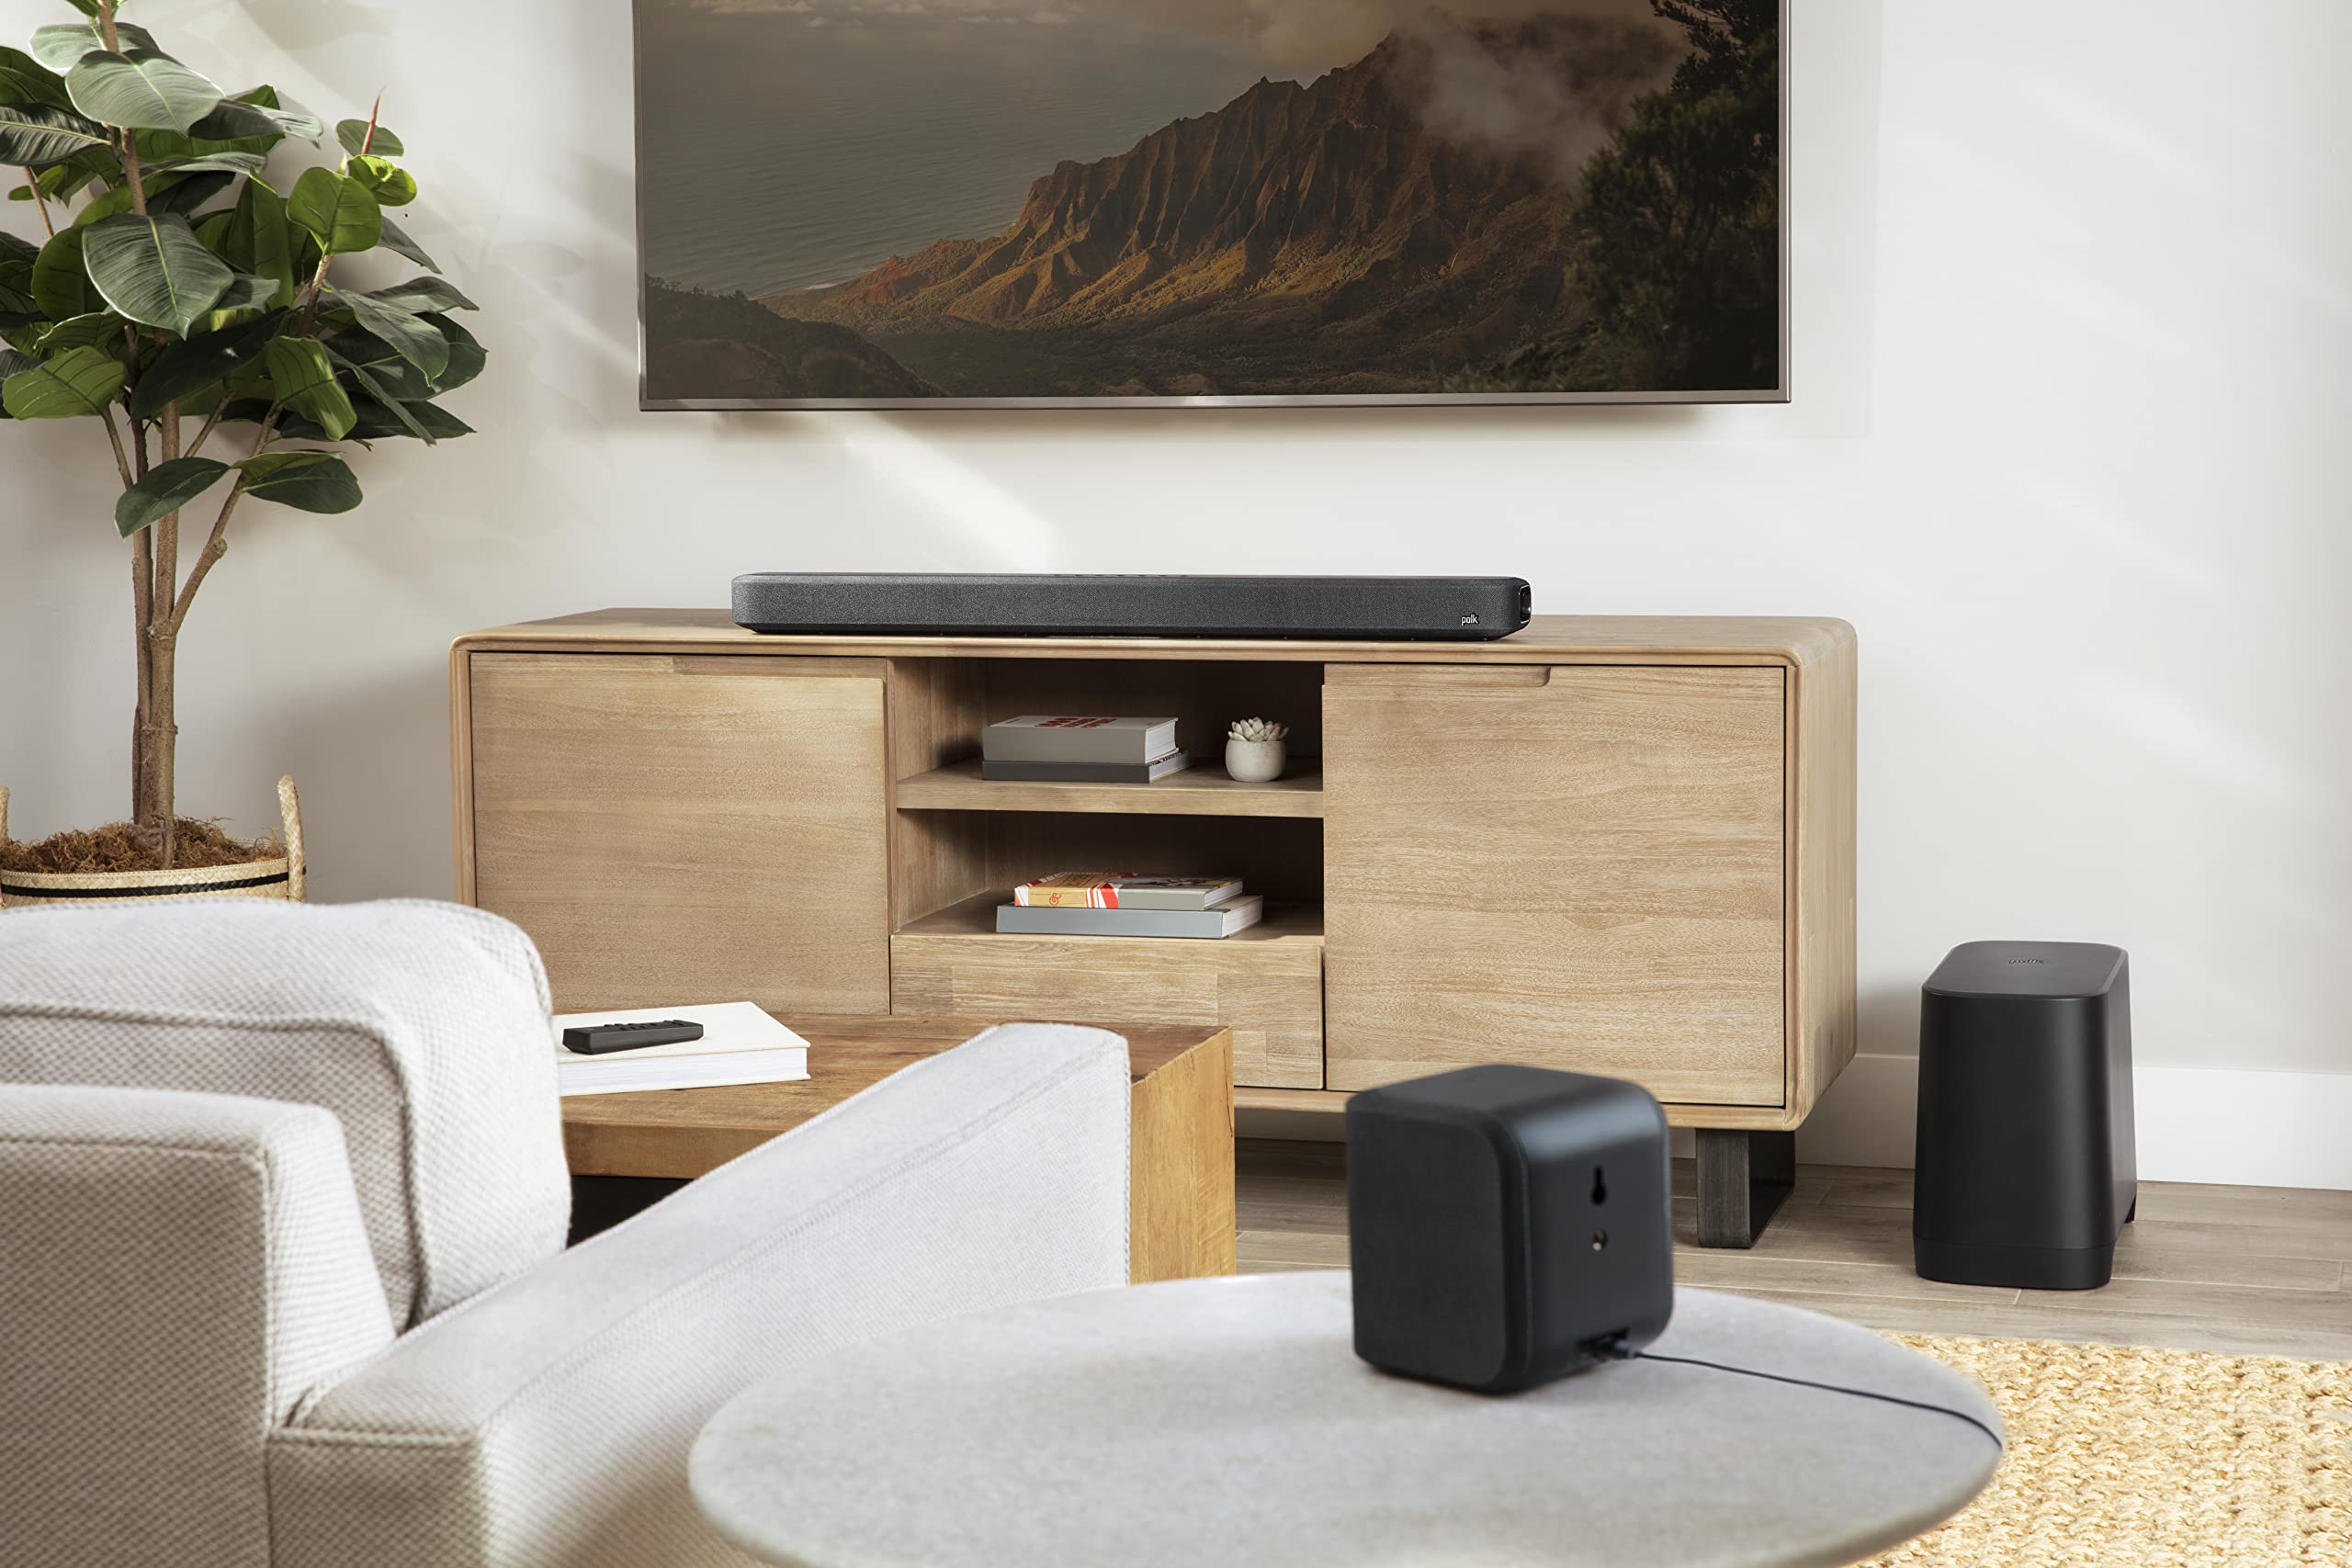 Polk True Surround III 5.1 Channel Wireless Surround Sound System, Includes Sound Bar, L & R Rear Surrounds and 7'' Subwoofer, Dolby Digital Decoding, Built-in Bluetooth, Easy Setup, Black